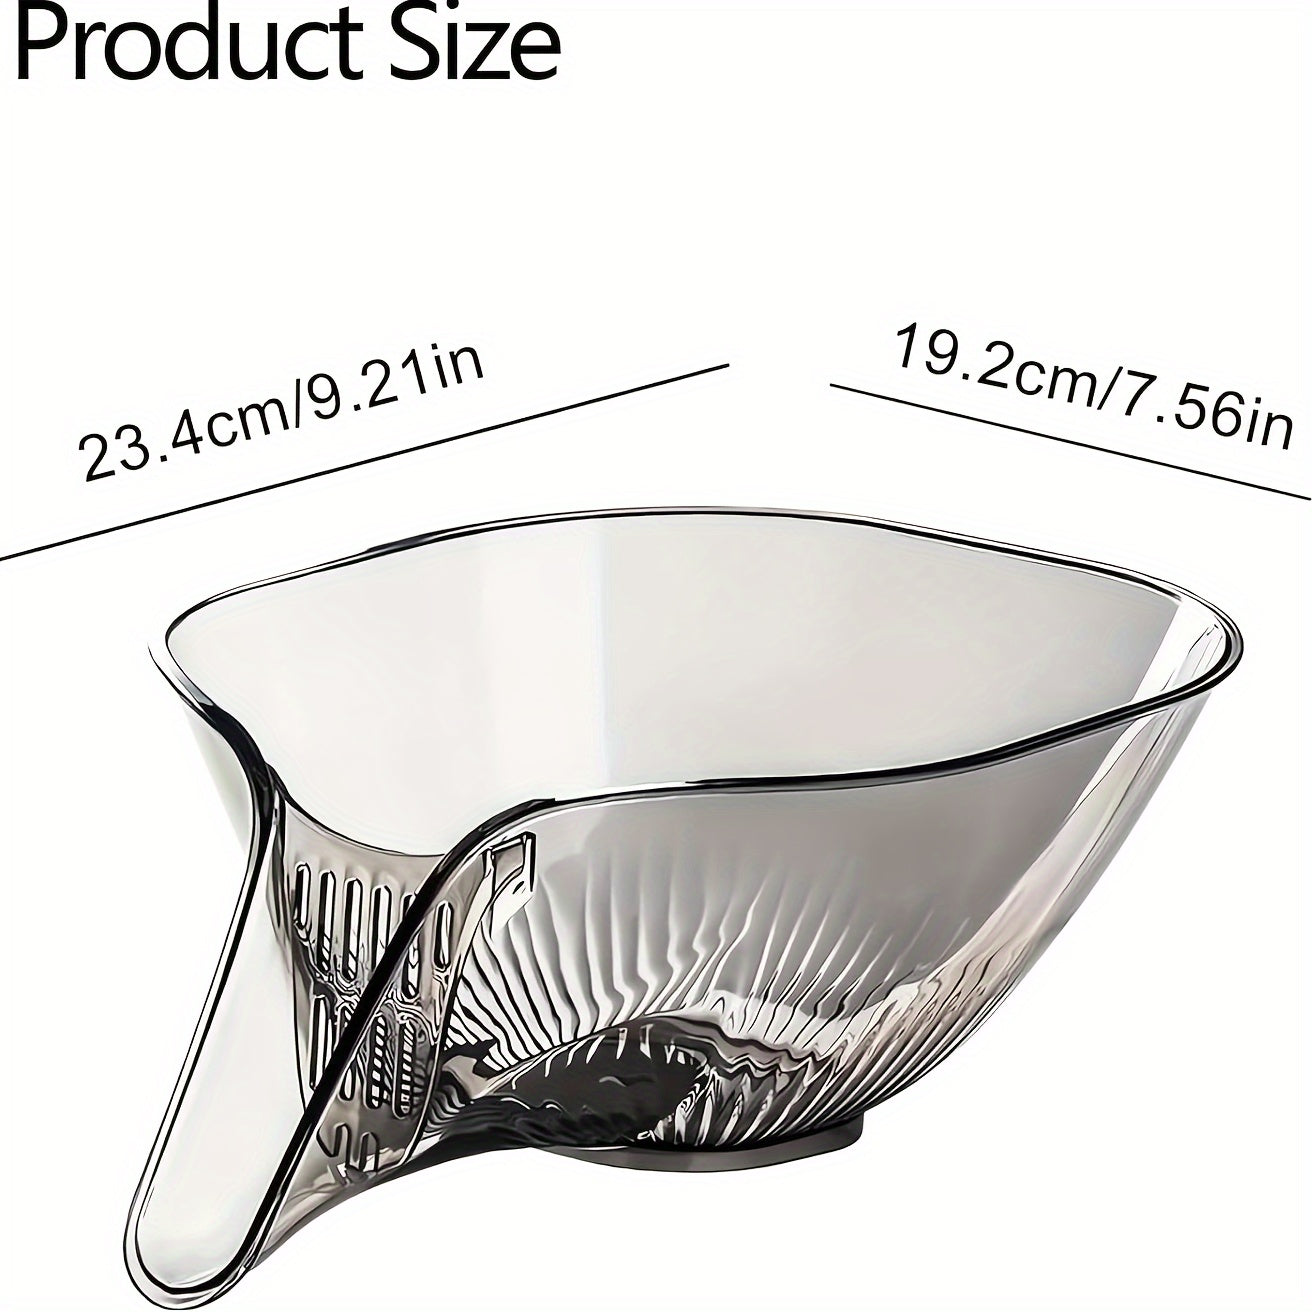 Multifunctional Drain Basket - Fruit Cleaning Bowl With Strainer Container, Kitchen Sink Basket